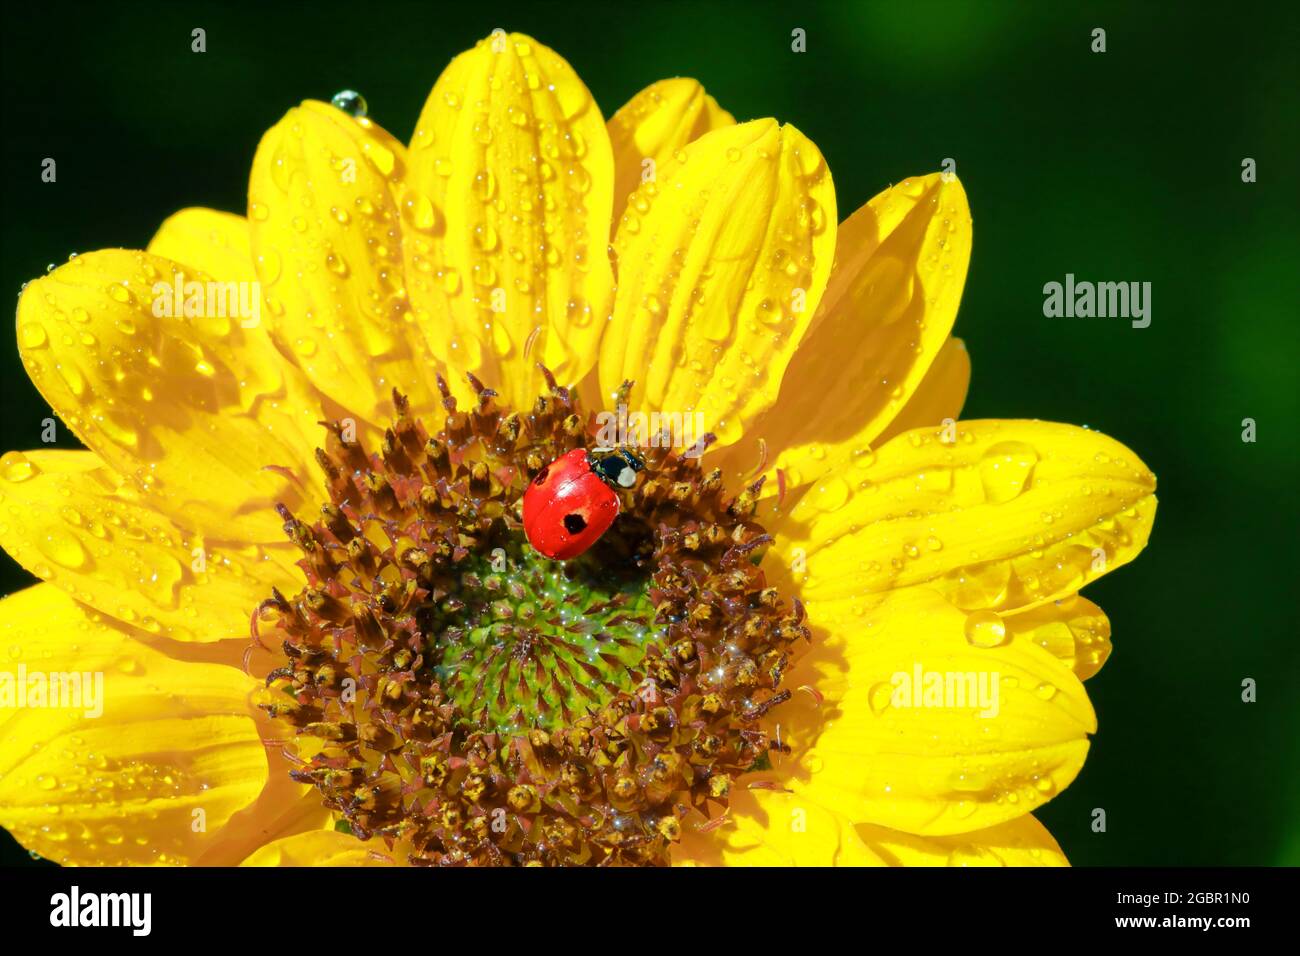 zoology, insects (Insecta), two-spot ladybird on sunflower, Switzerland, NO-EXCLUSIVE-USE FOR FOLDING-CARD-GREETING-CARD-POSTCARD-USE Stock Photo